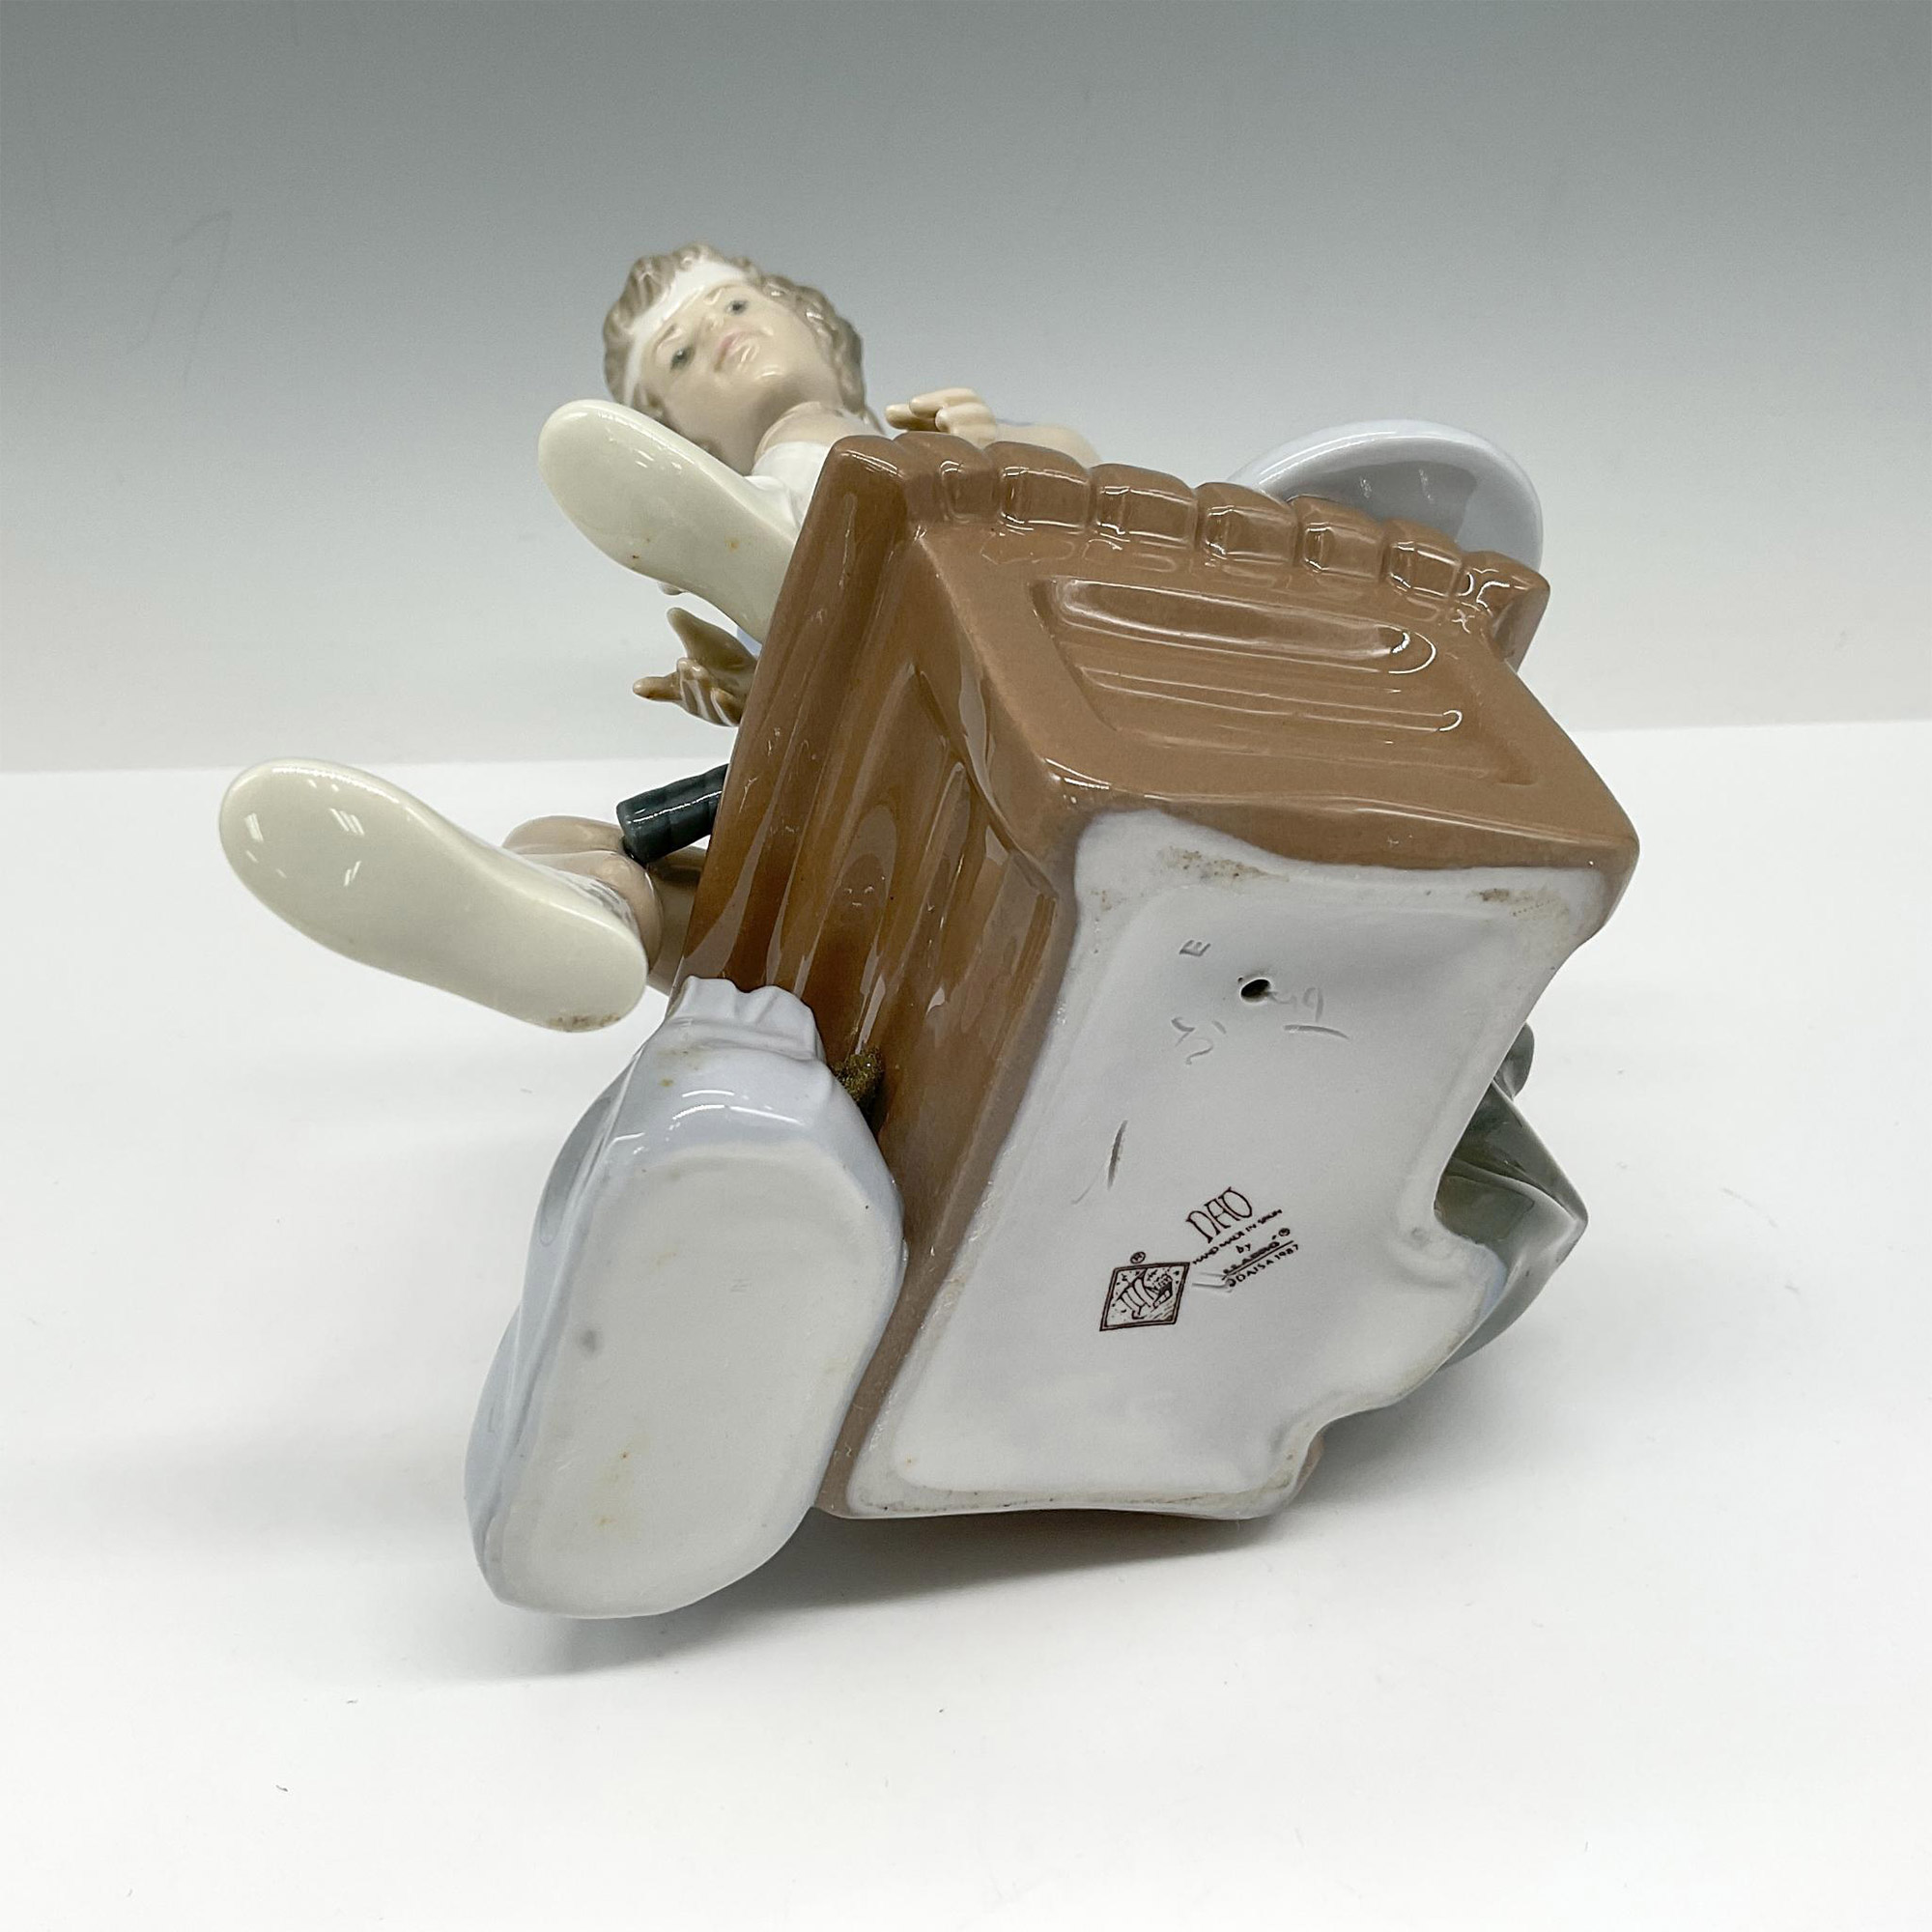 Match Time - Nao by Lladro Porcelain Figurine - Image 4 of 4